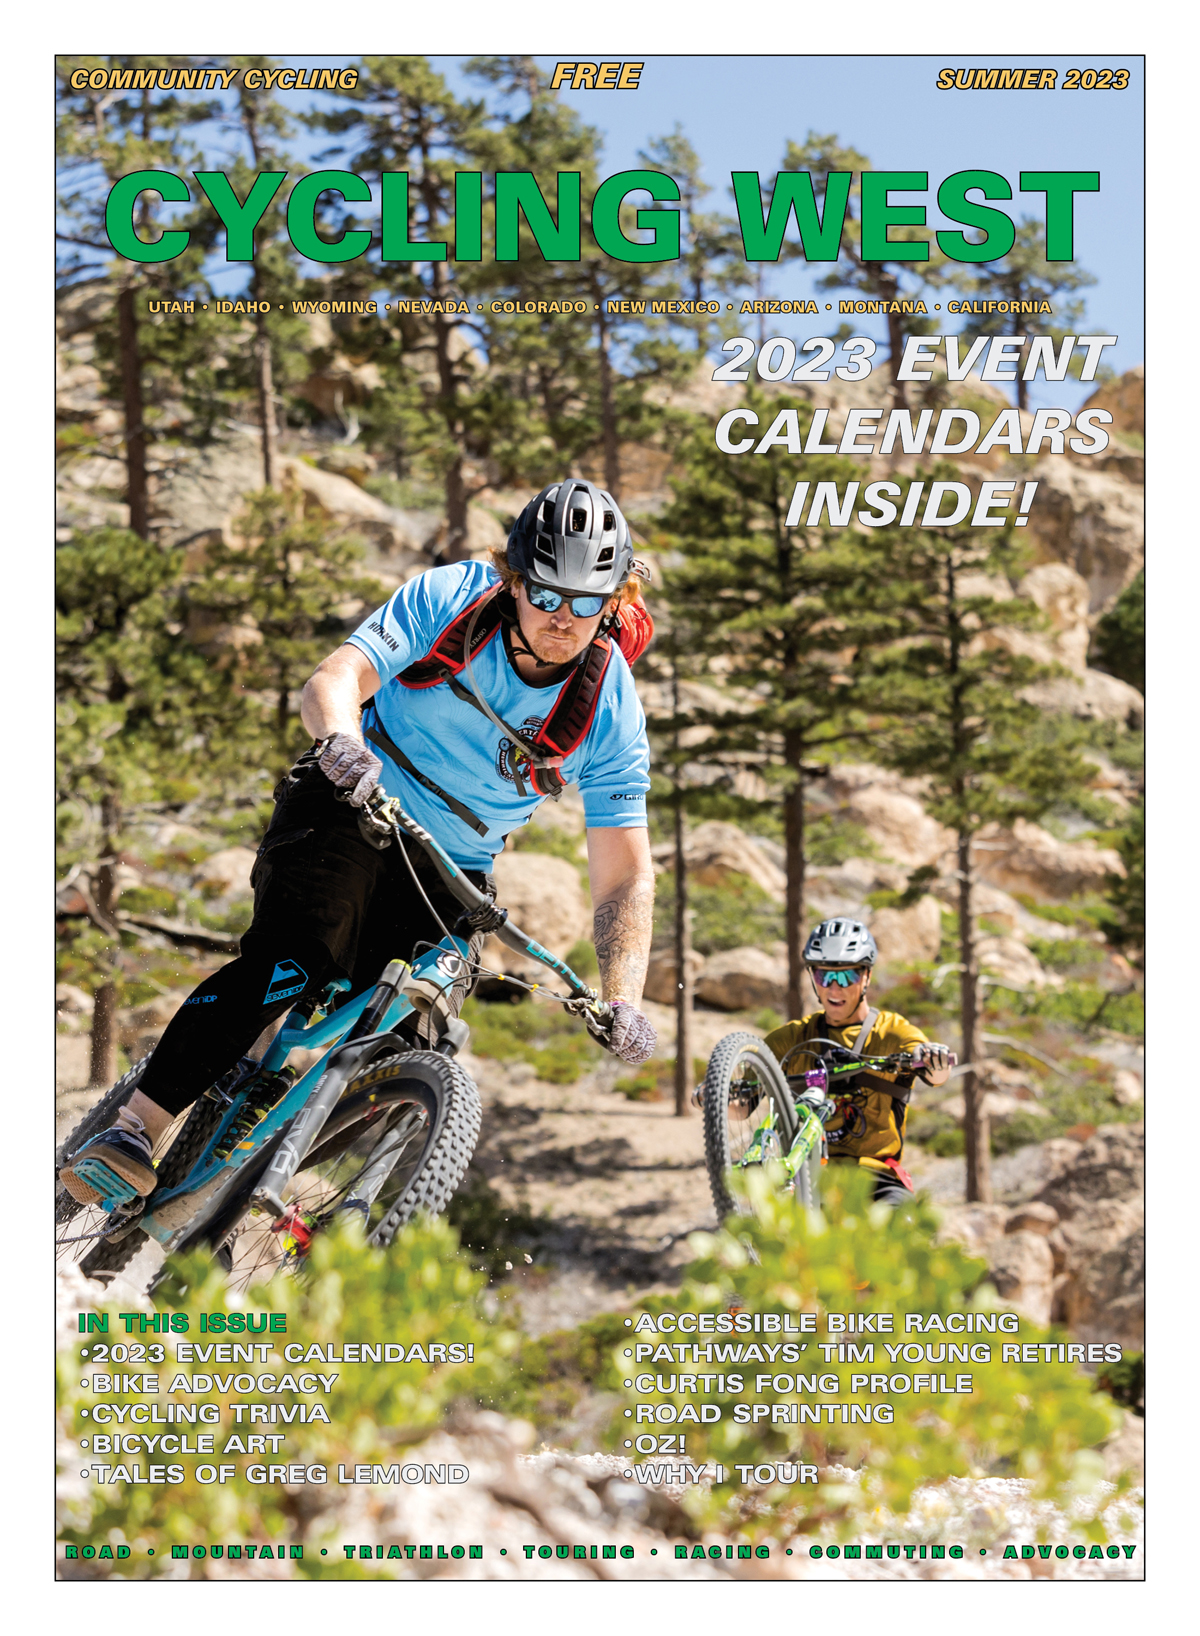 Cycling West Summer 2023 Cover Photo: Eddie Staton and Ren Dutton on top of the Ella Trail on Ella Mountain during the 2022 Caliente MTB Festival in Caliente, Nevada.Photo by John Shafer, Photo-John.net